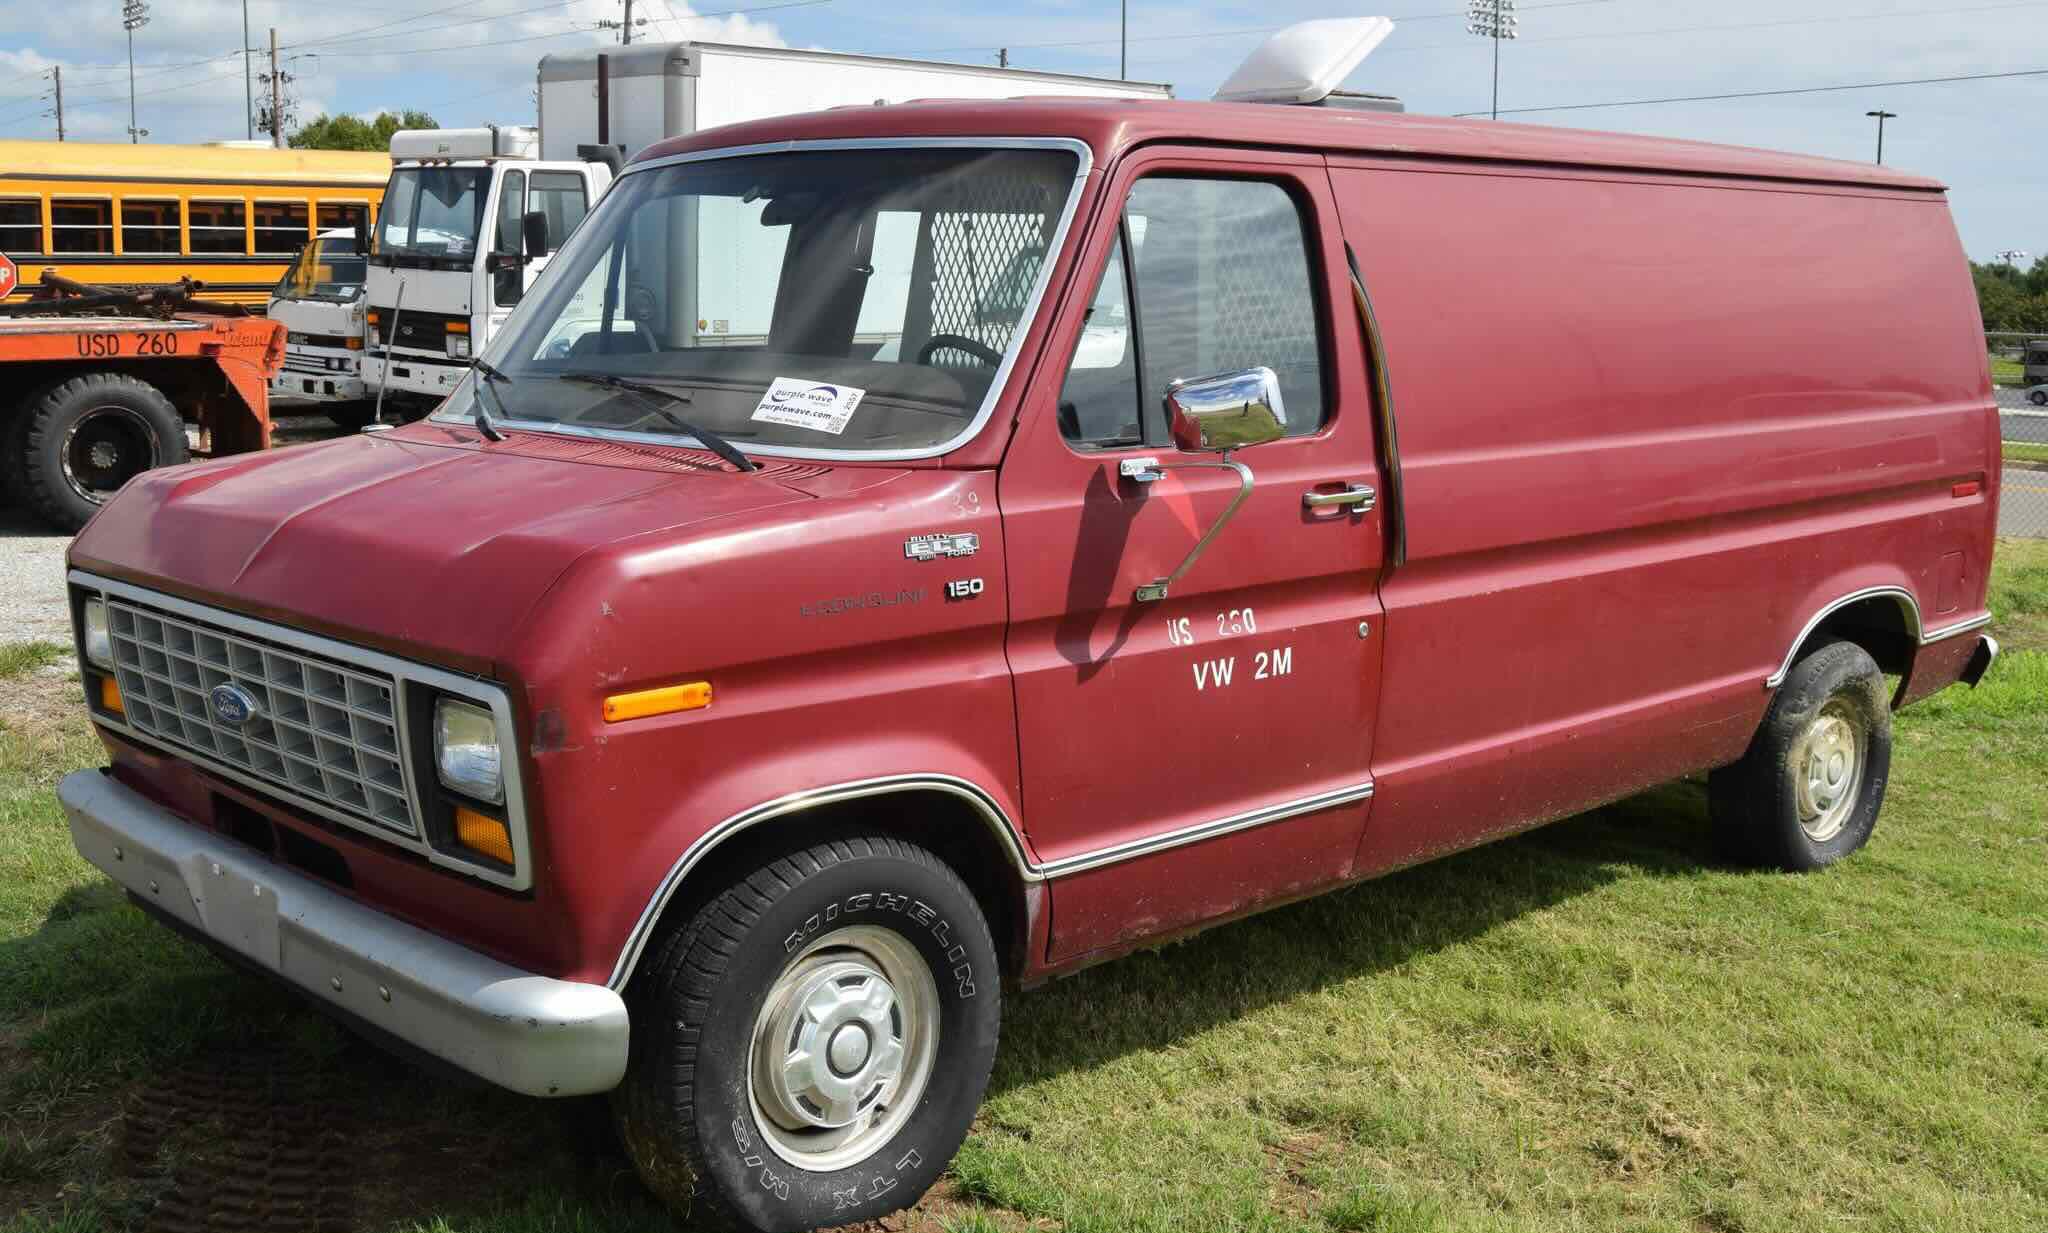 Ford Econoline Van 1989: How To Remove Ventilation System From Inside The Vehicle